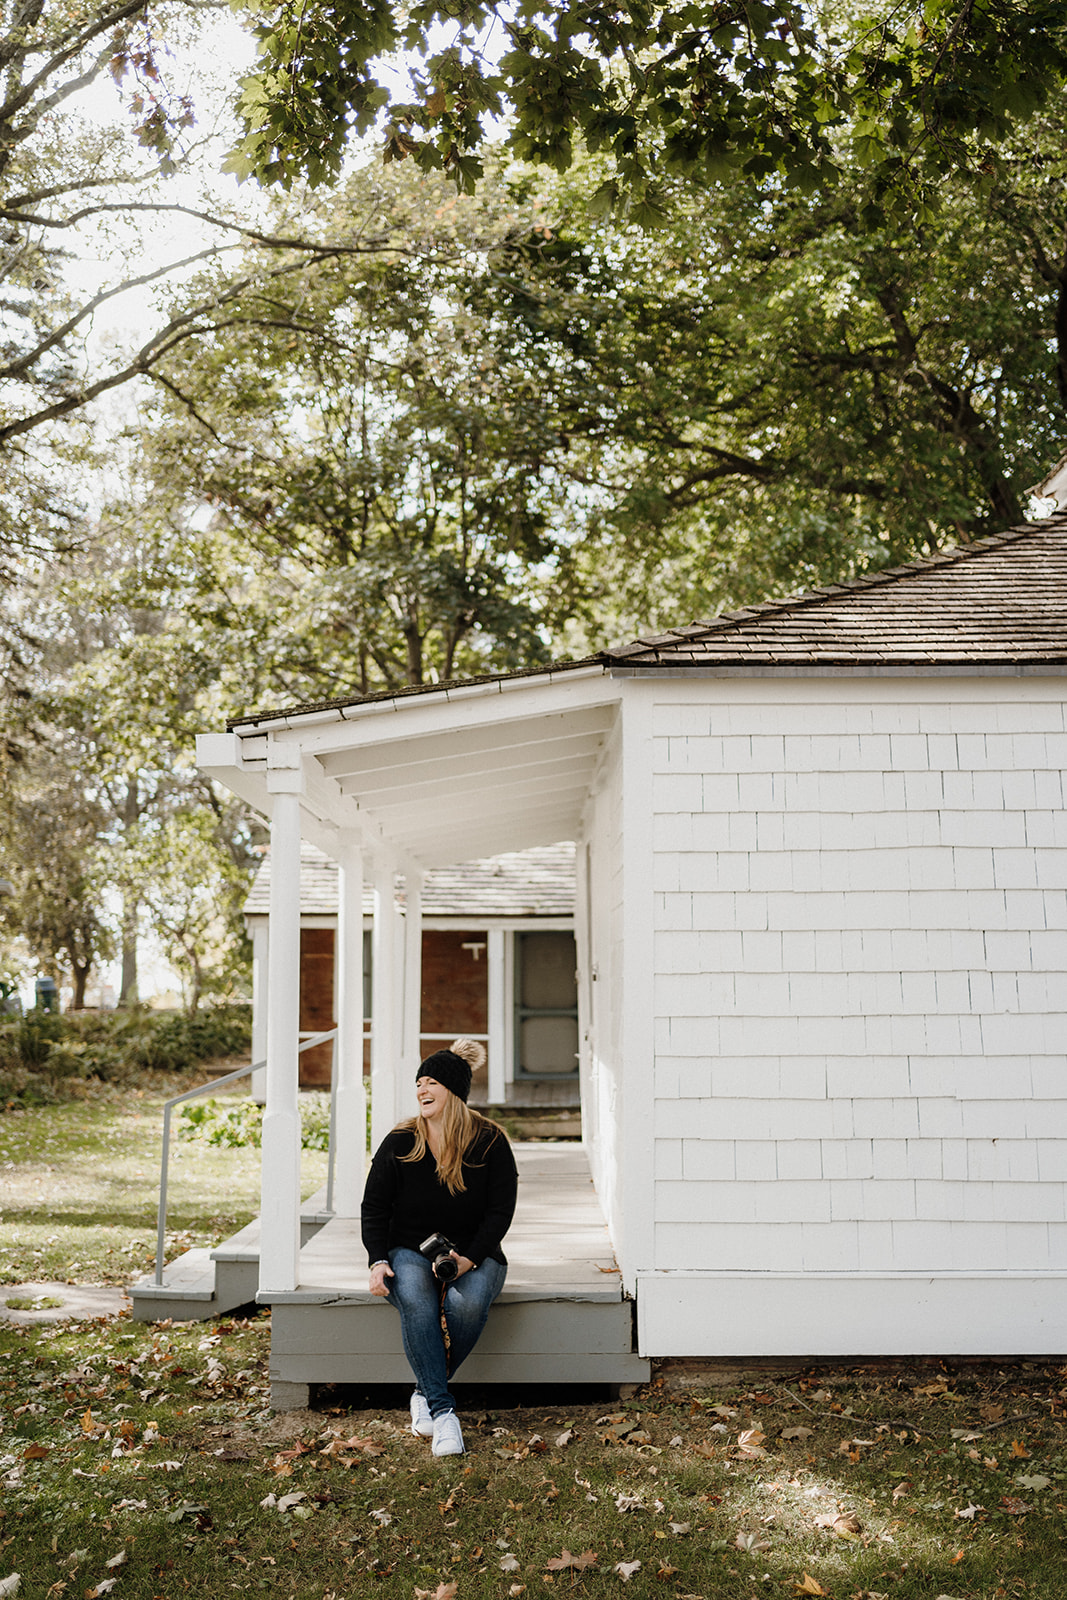 A lady sitting on the porch of a house.